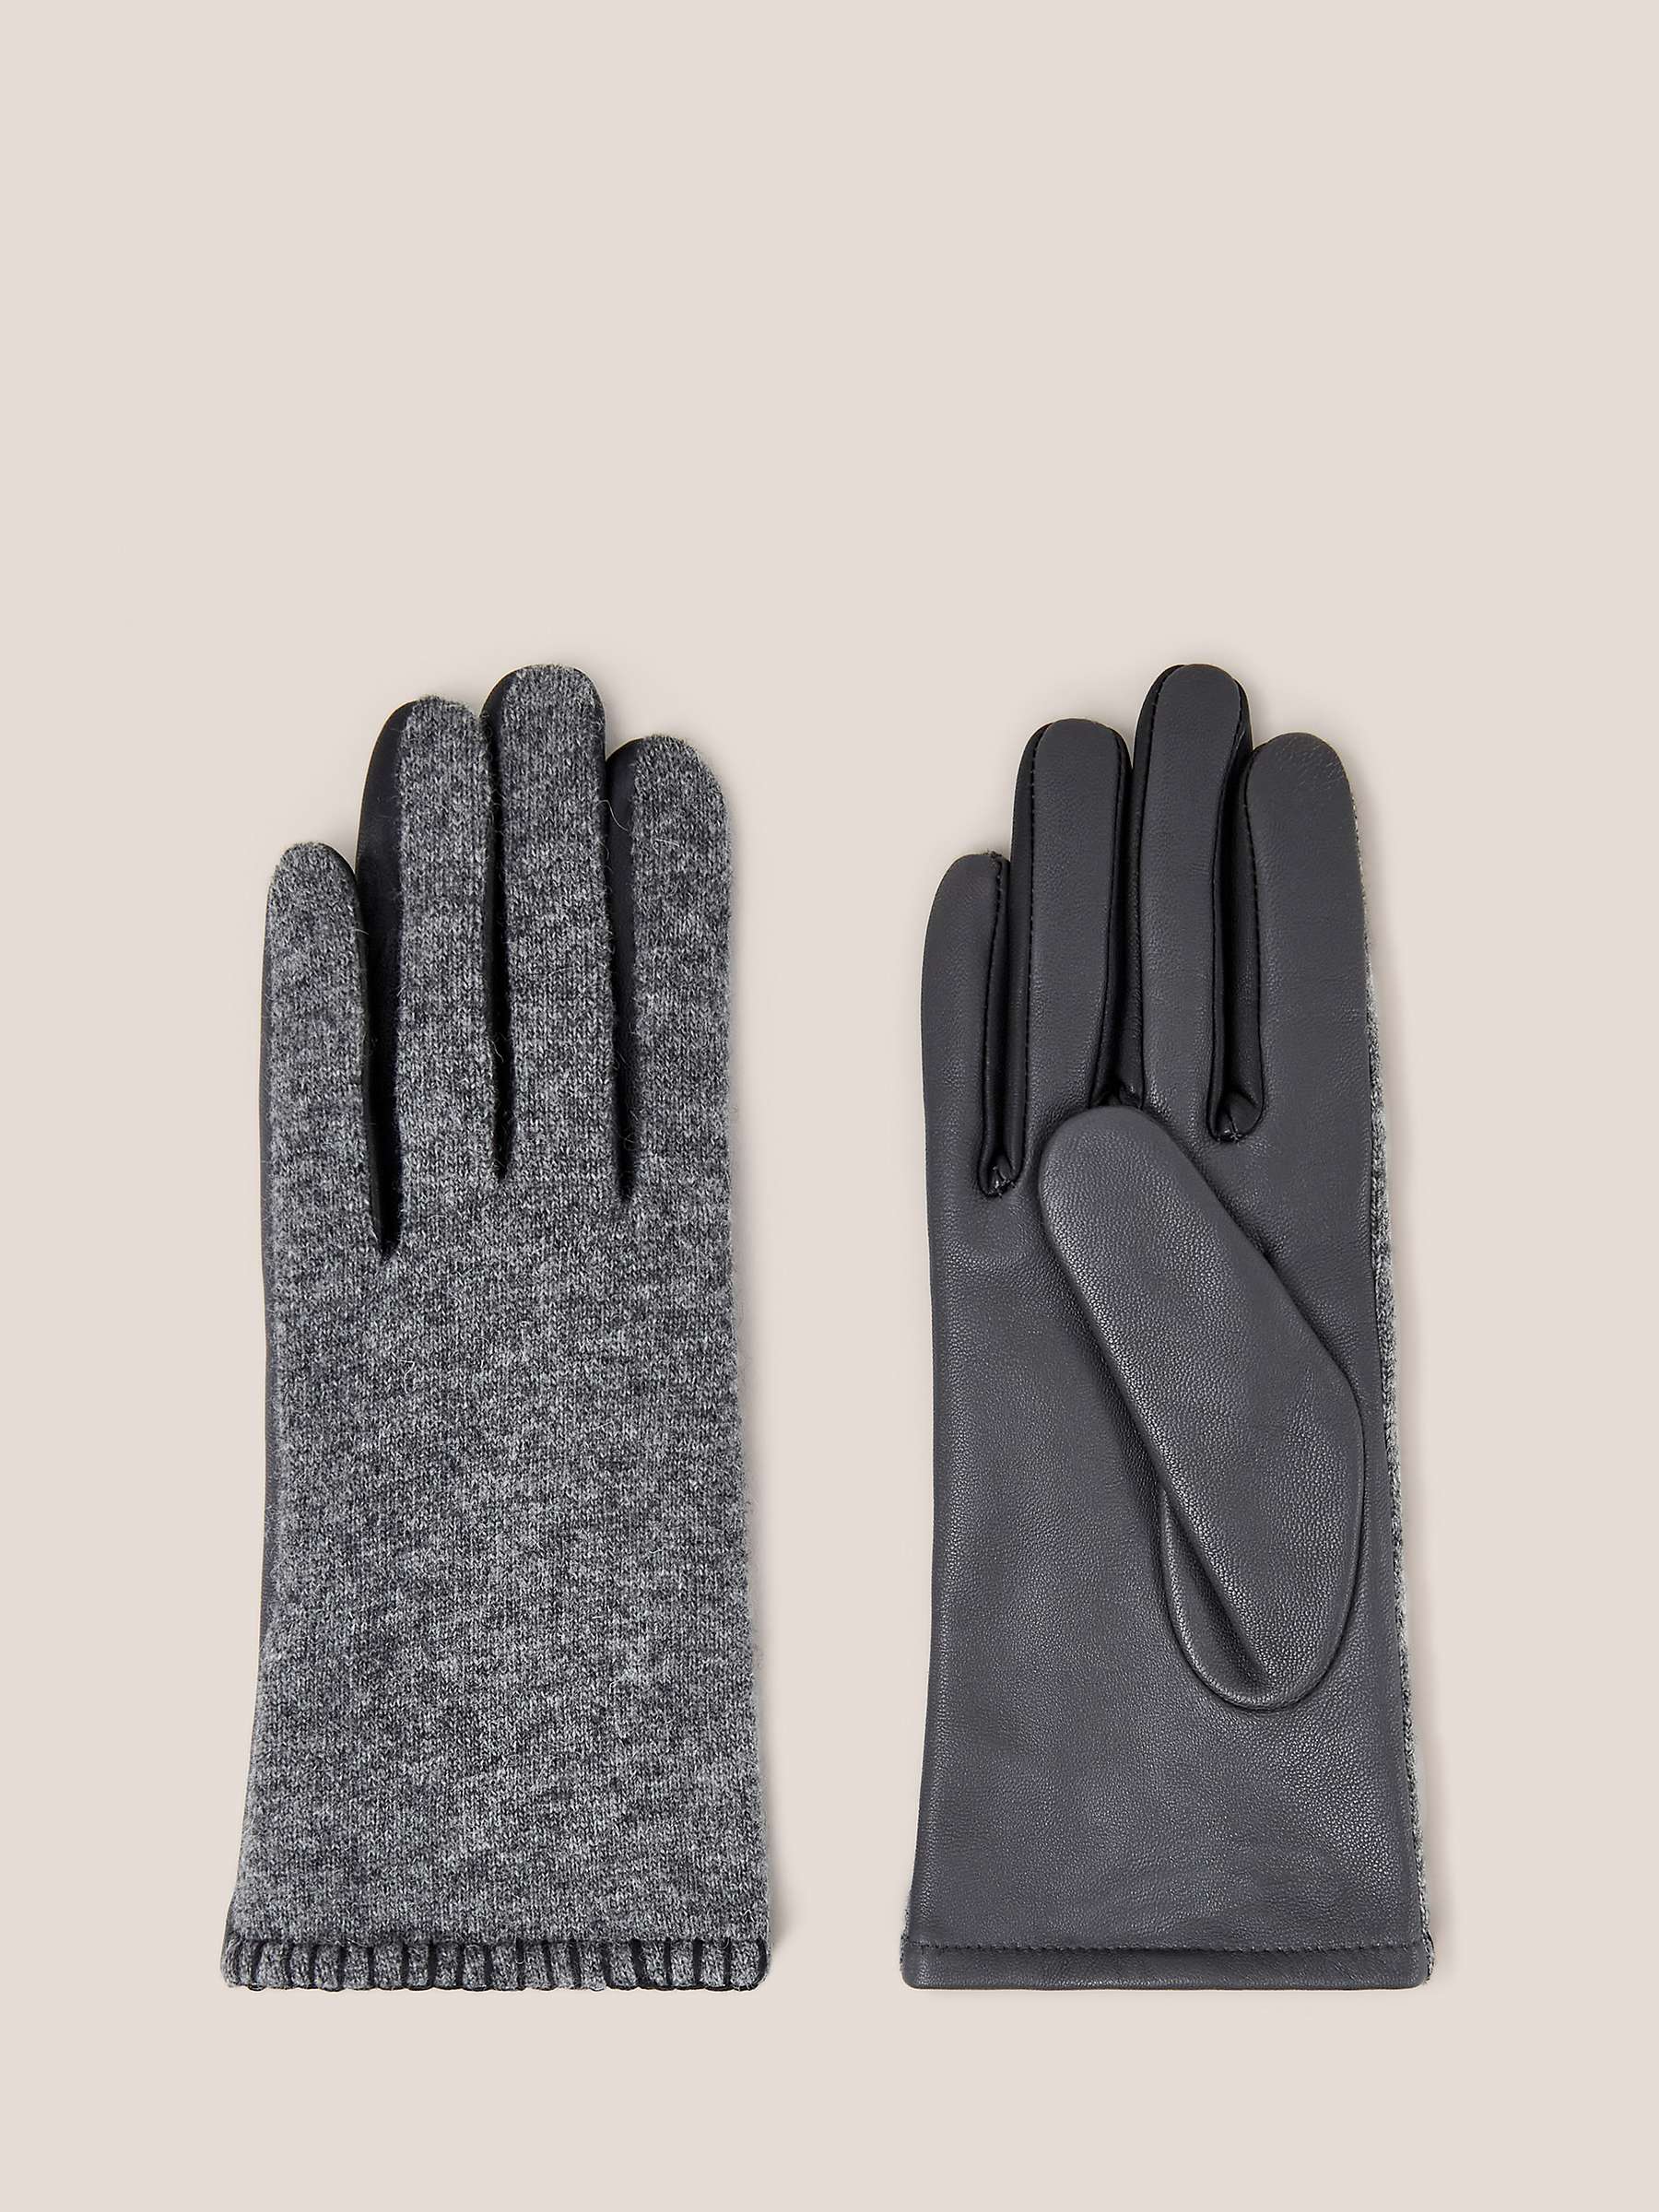 Buy White Stuff Lucie Leather Gloves Online at johnlewis.com